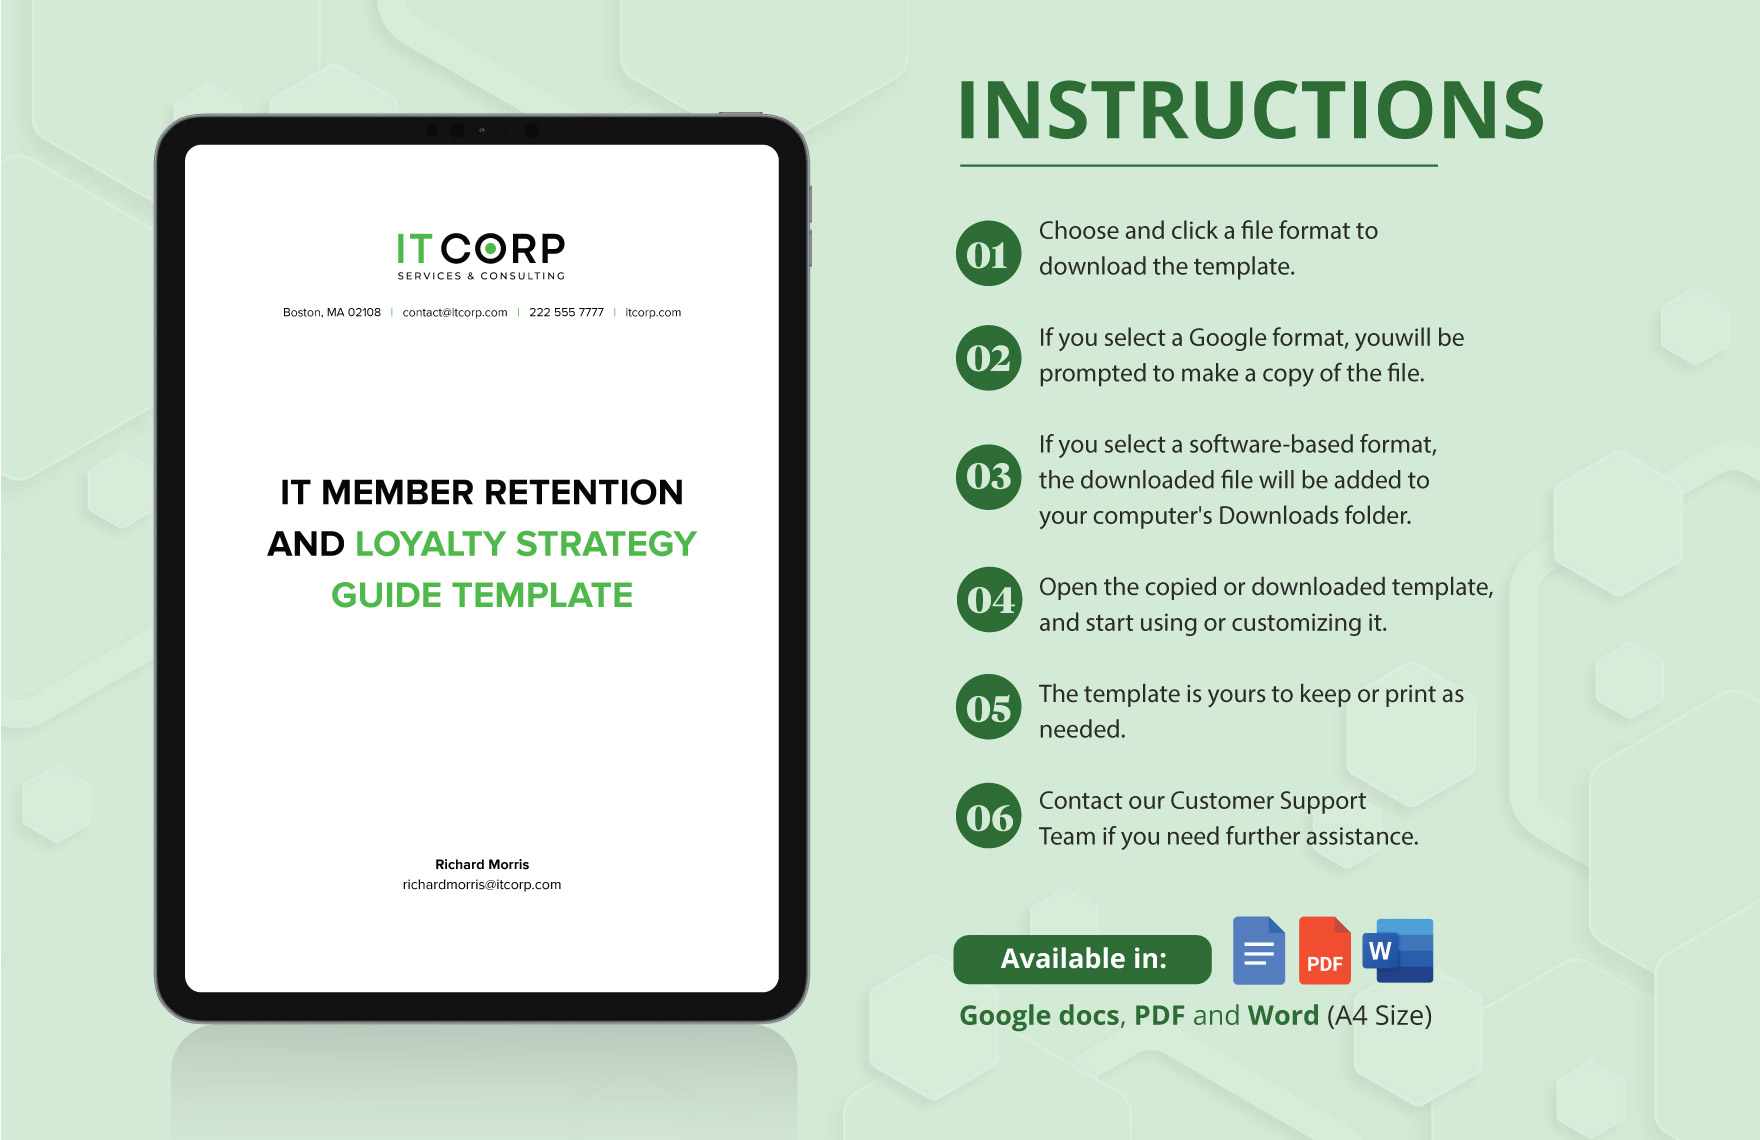 IT Member Retention and Loyalty Strategy Guide Template